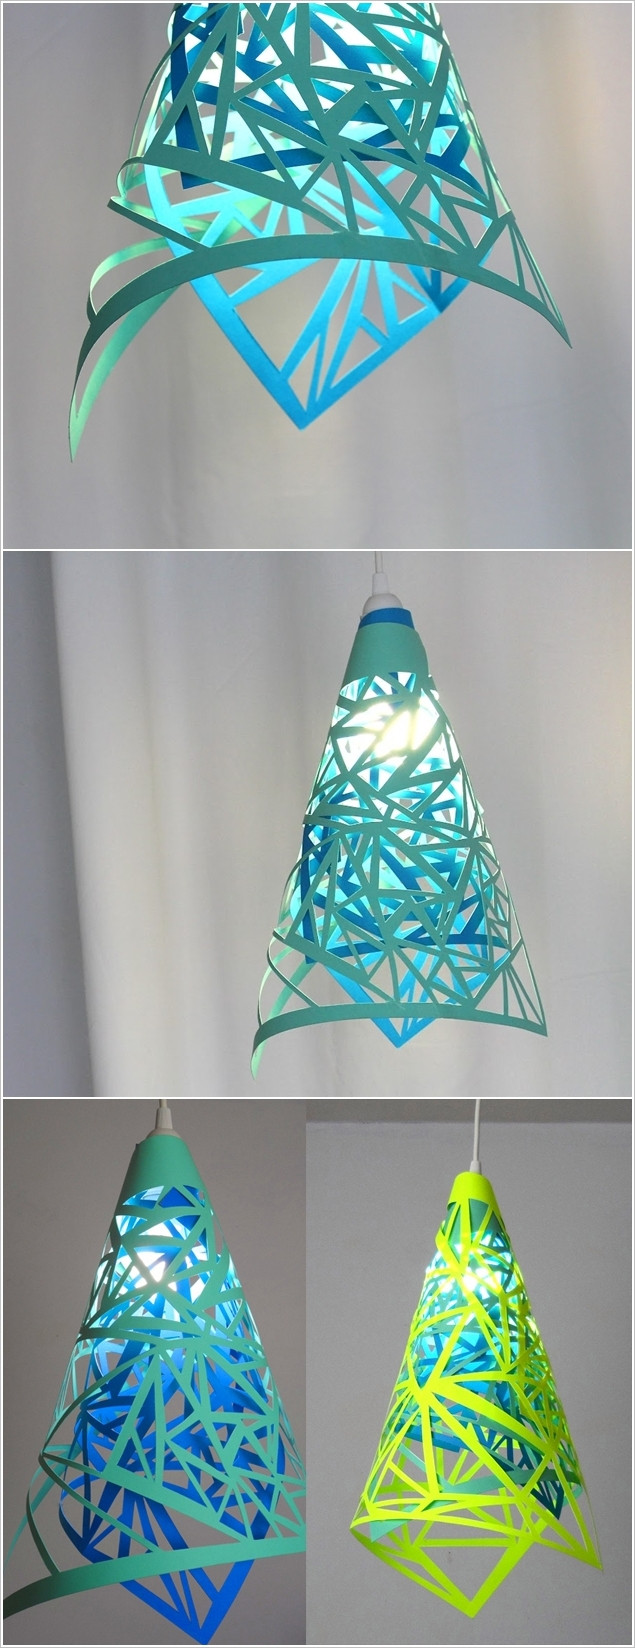 Paper Lantern Lights For Bedroom
 20 Amazing DIY Paper Lanterns and Lamps Amazing House Design